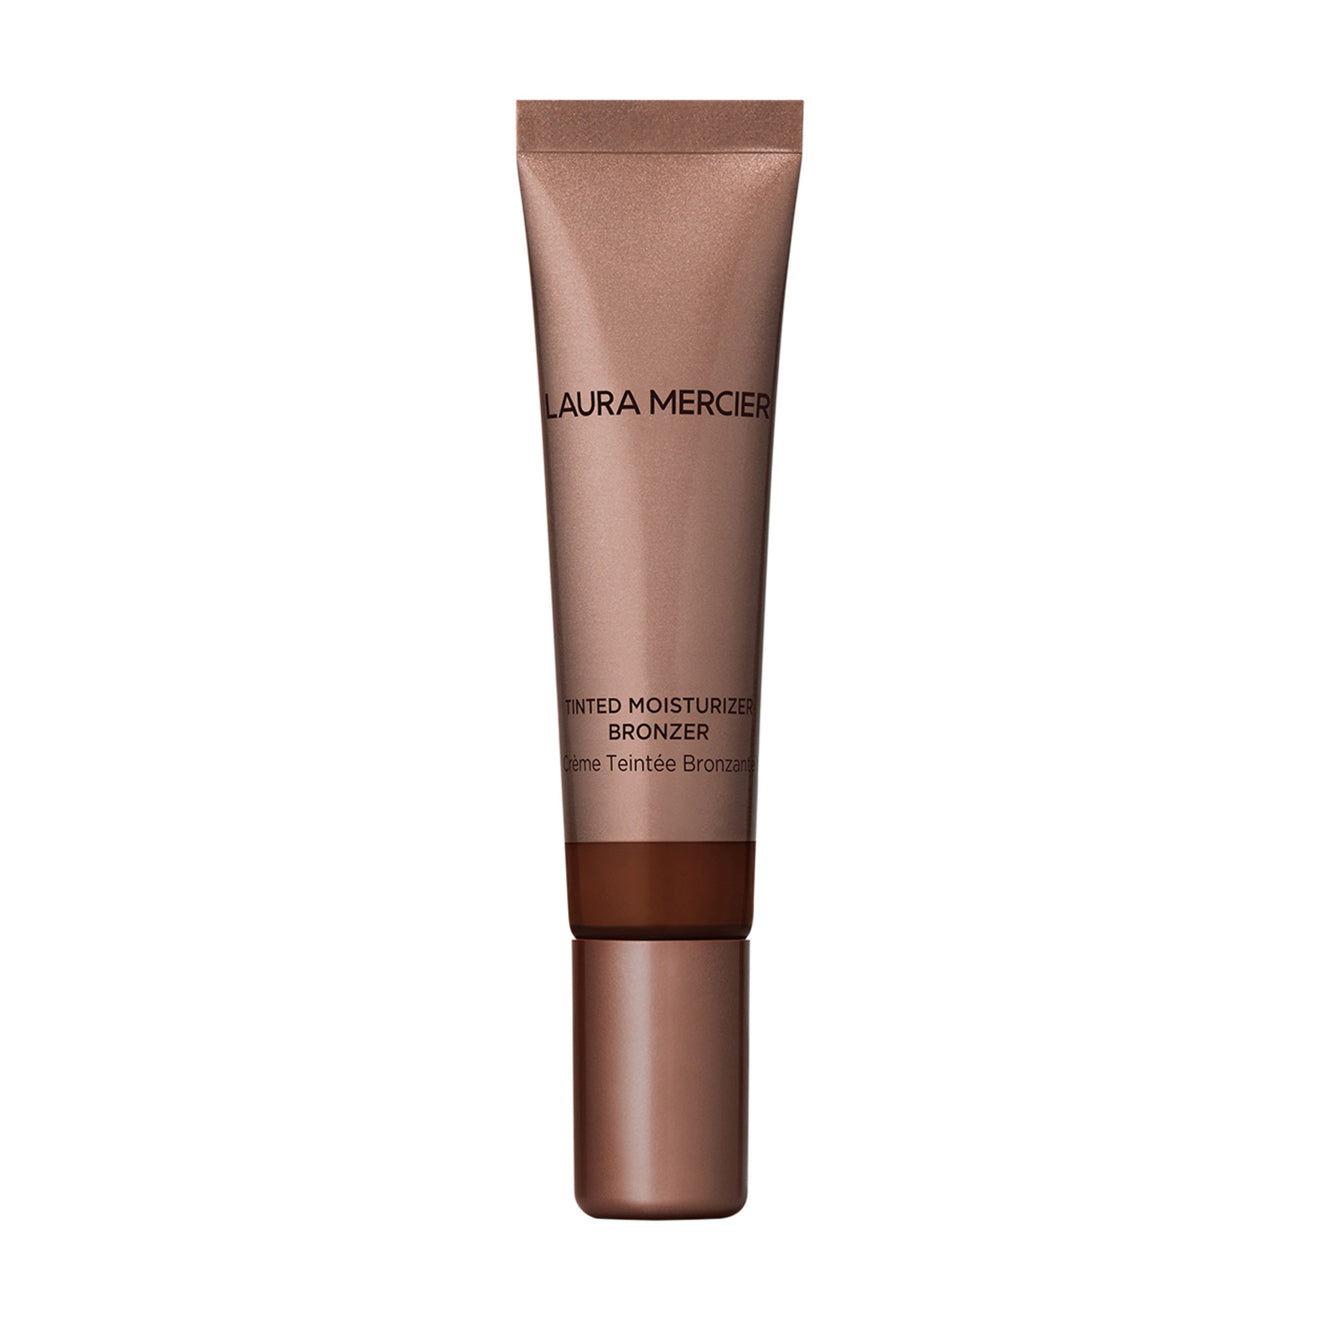 Laura Mercier Tinted Moisturizer Bronzer Color/Shade variant: 06 Sunspell main image. This product is for deep complexions